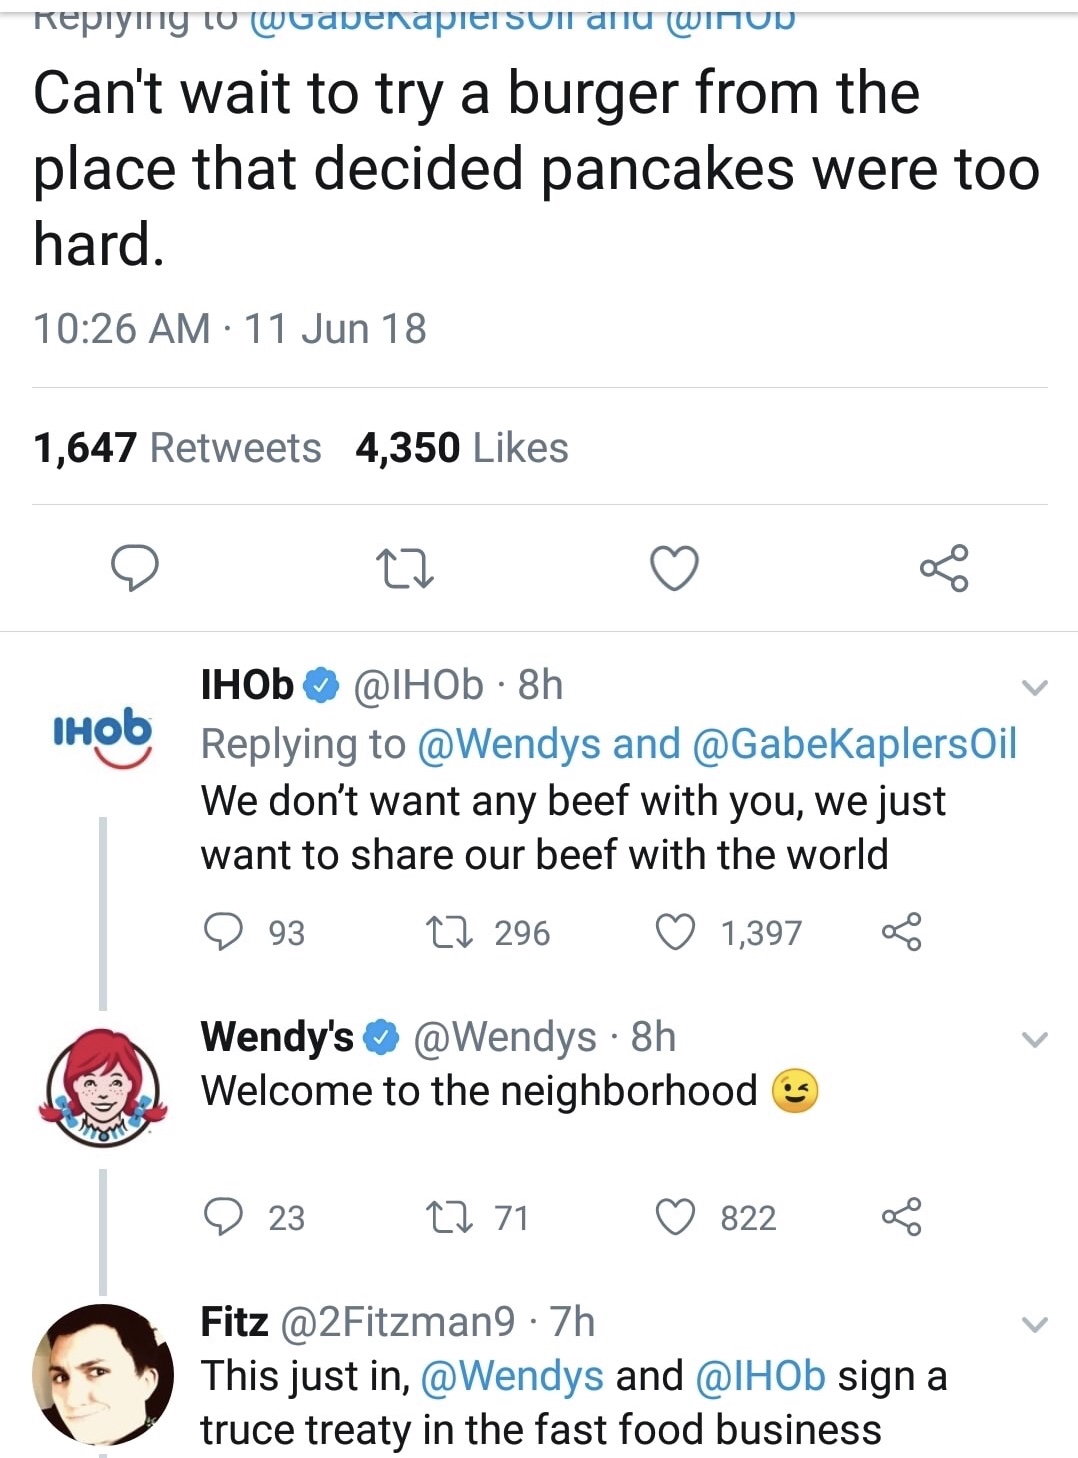 ihob twitter wendys - Repiymy tu wapenapiersul anu WinUp Can't wait to try a burger from the place that decided pancakes were too hard. 11 Jun 18 1,647 4,350 O Cz Ihod IHOb 8h and Oil We don't want any beef with you, we just want to our beef with the worl